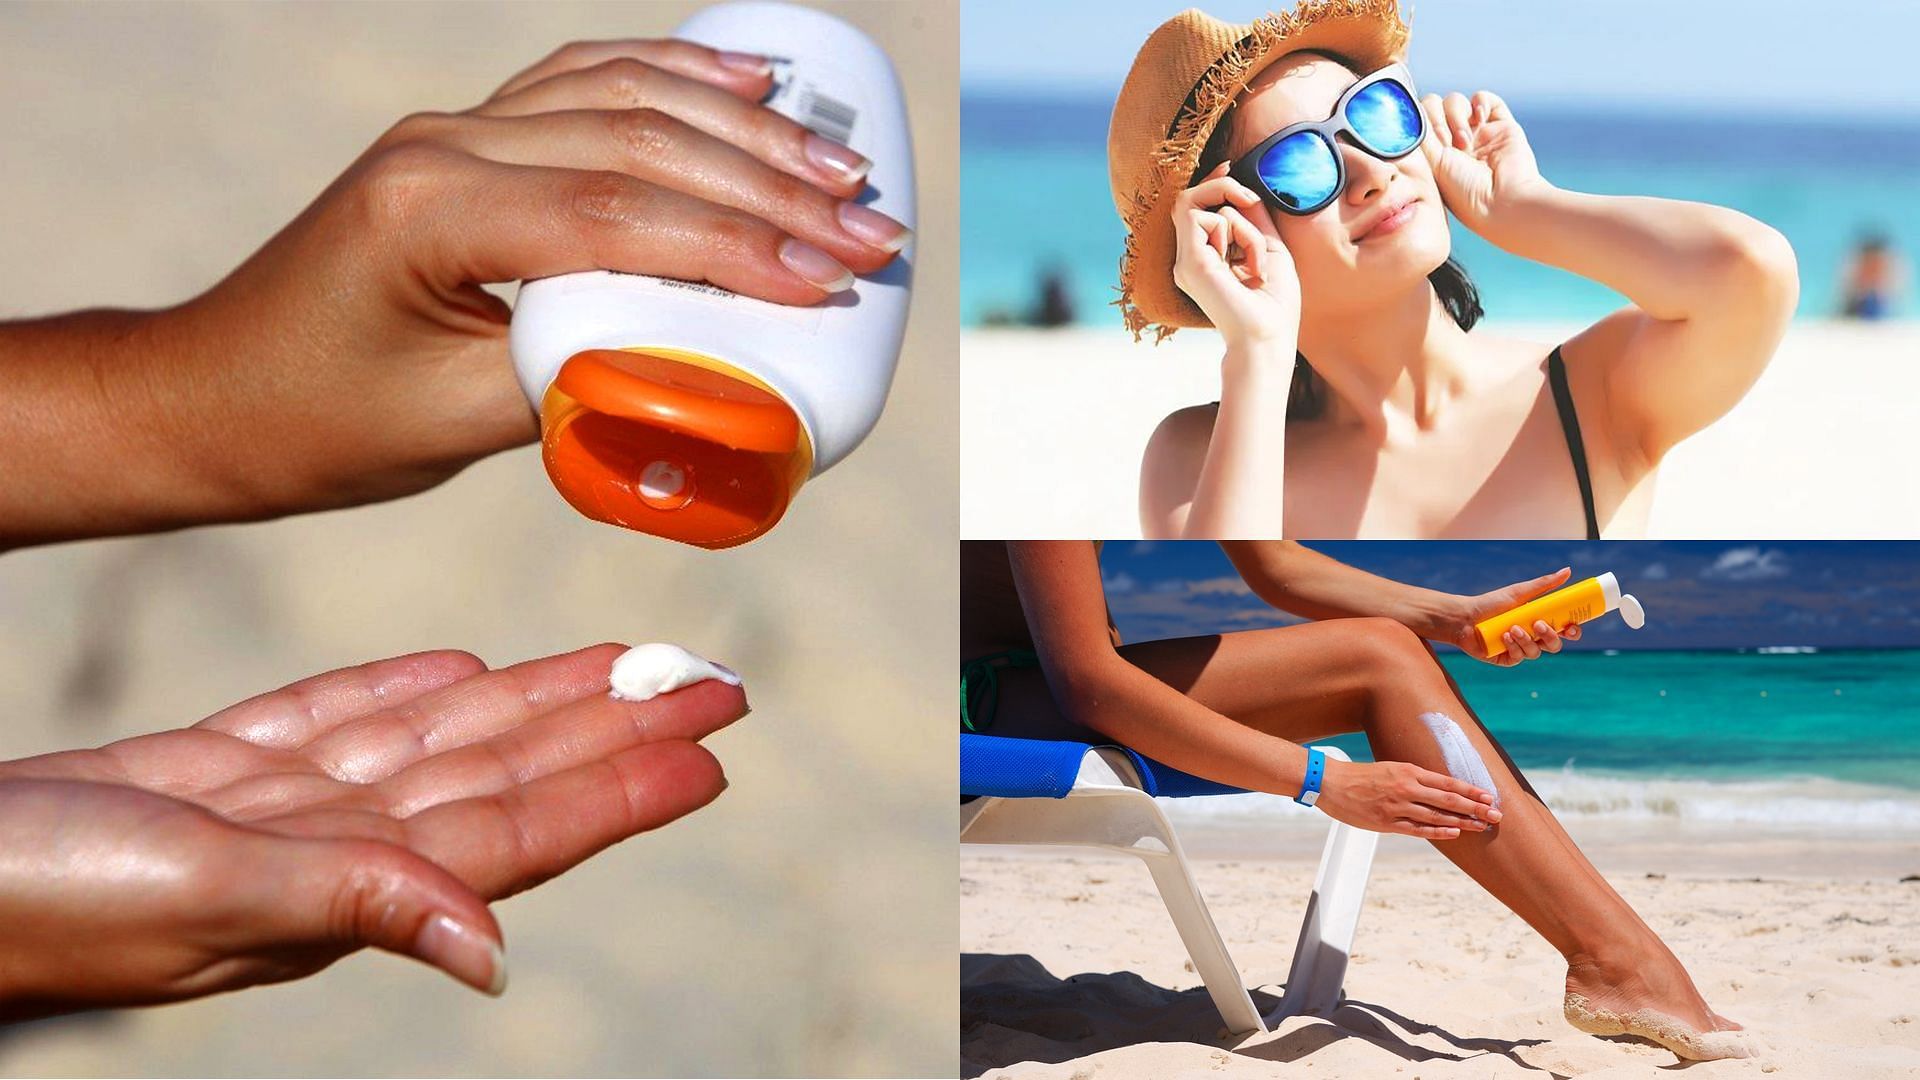 Shield the skin from the UVRyas with these 5 doctor-recommended SPF tips (Image via Sportskeeda)